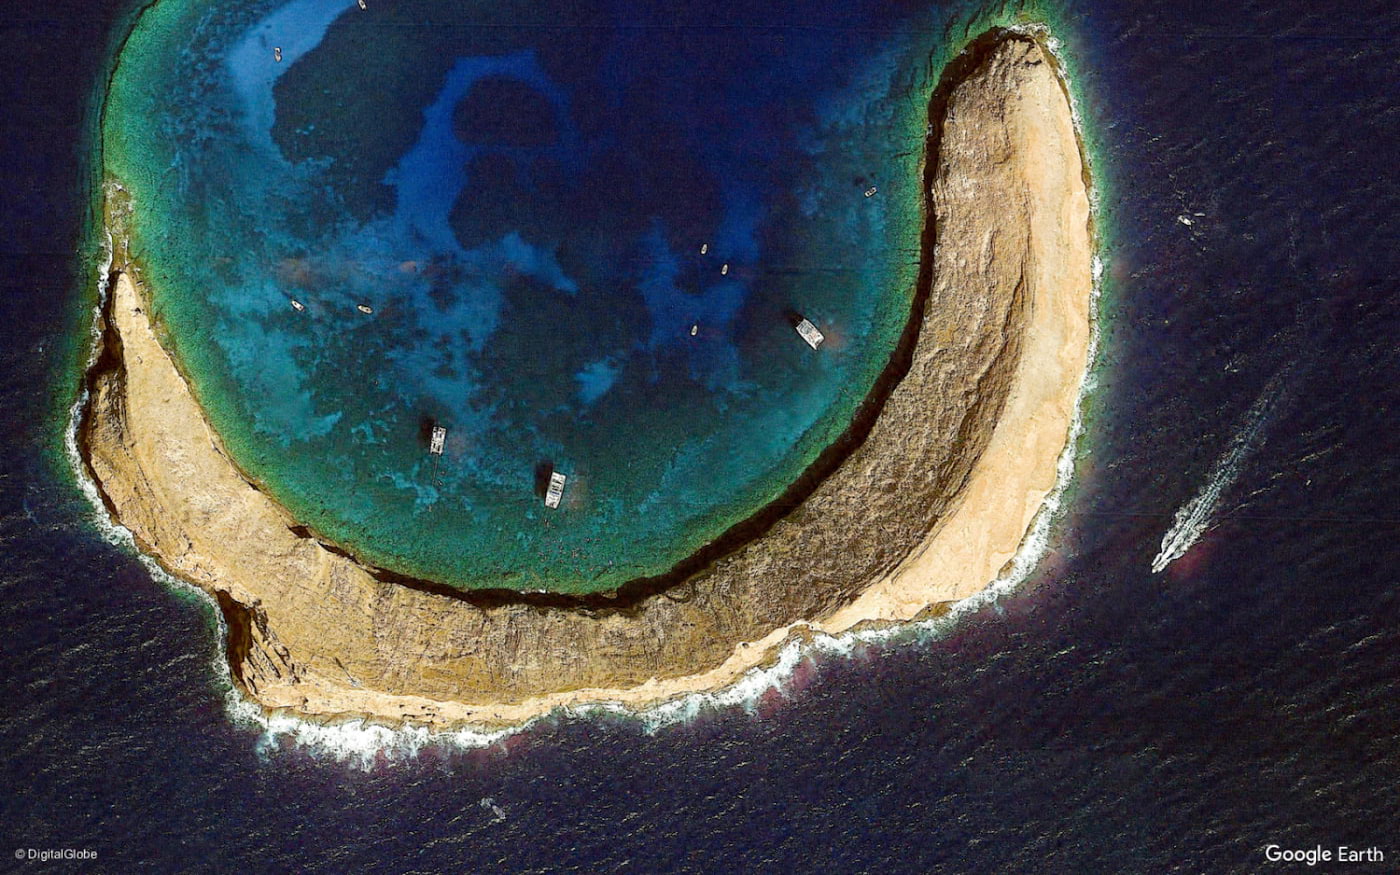 Google offers 1000 new beautiful panoramic images of different regions in Earth View